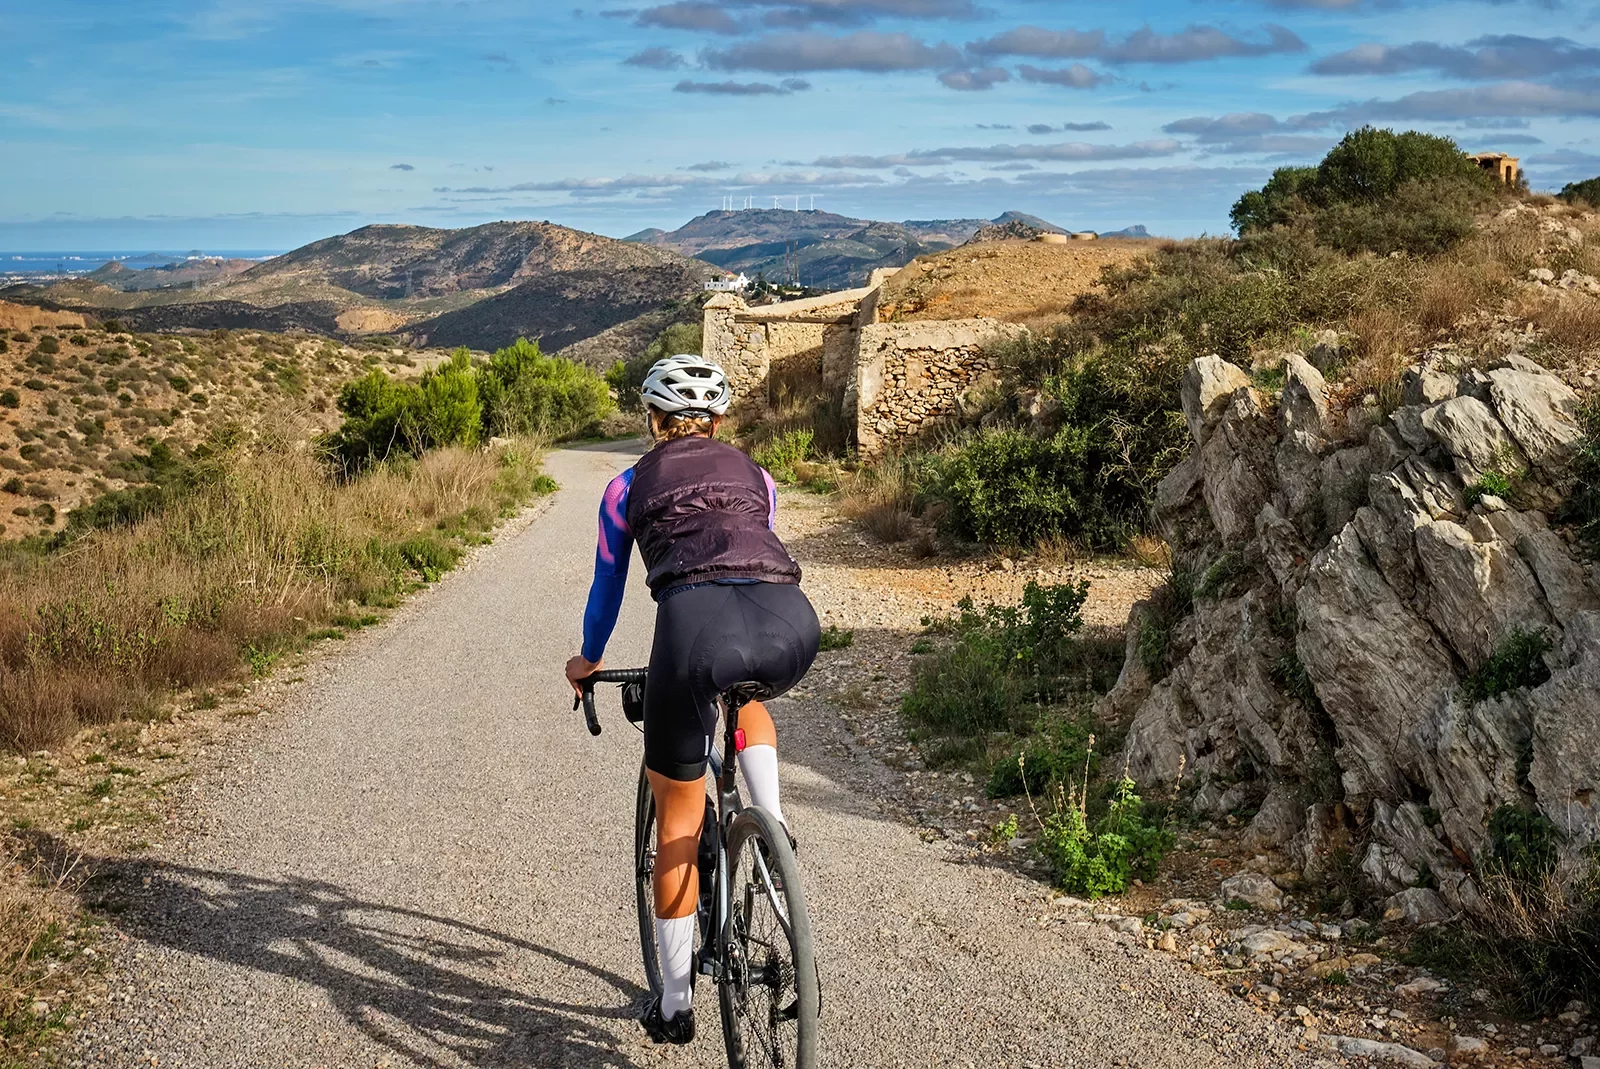 Guest cycling down gravel road, towards stone ruins, golden hills.